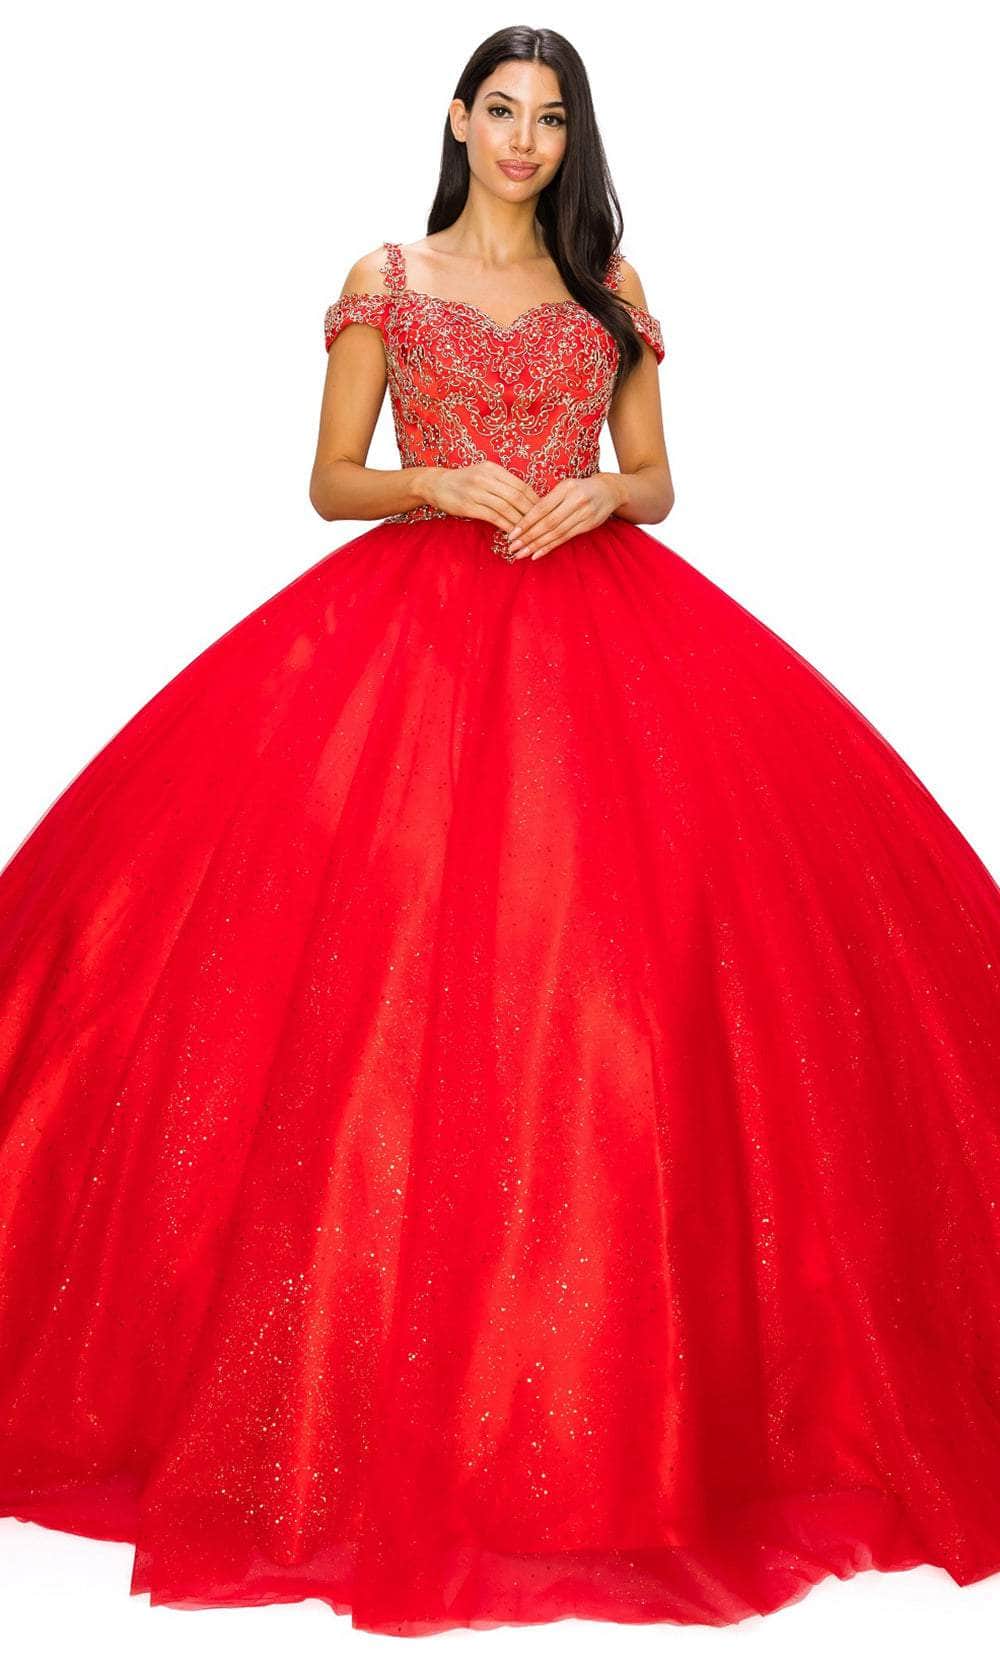 Cinderella Couture 8028J - Gold Embroidered Ballgown Special Occasion Dress XS / Red